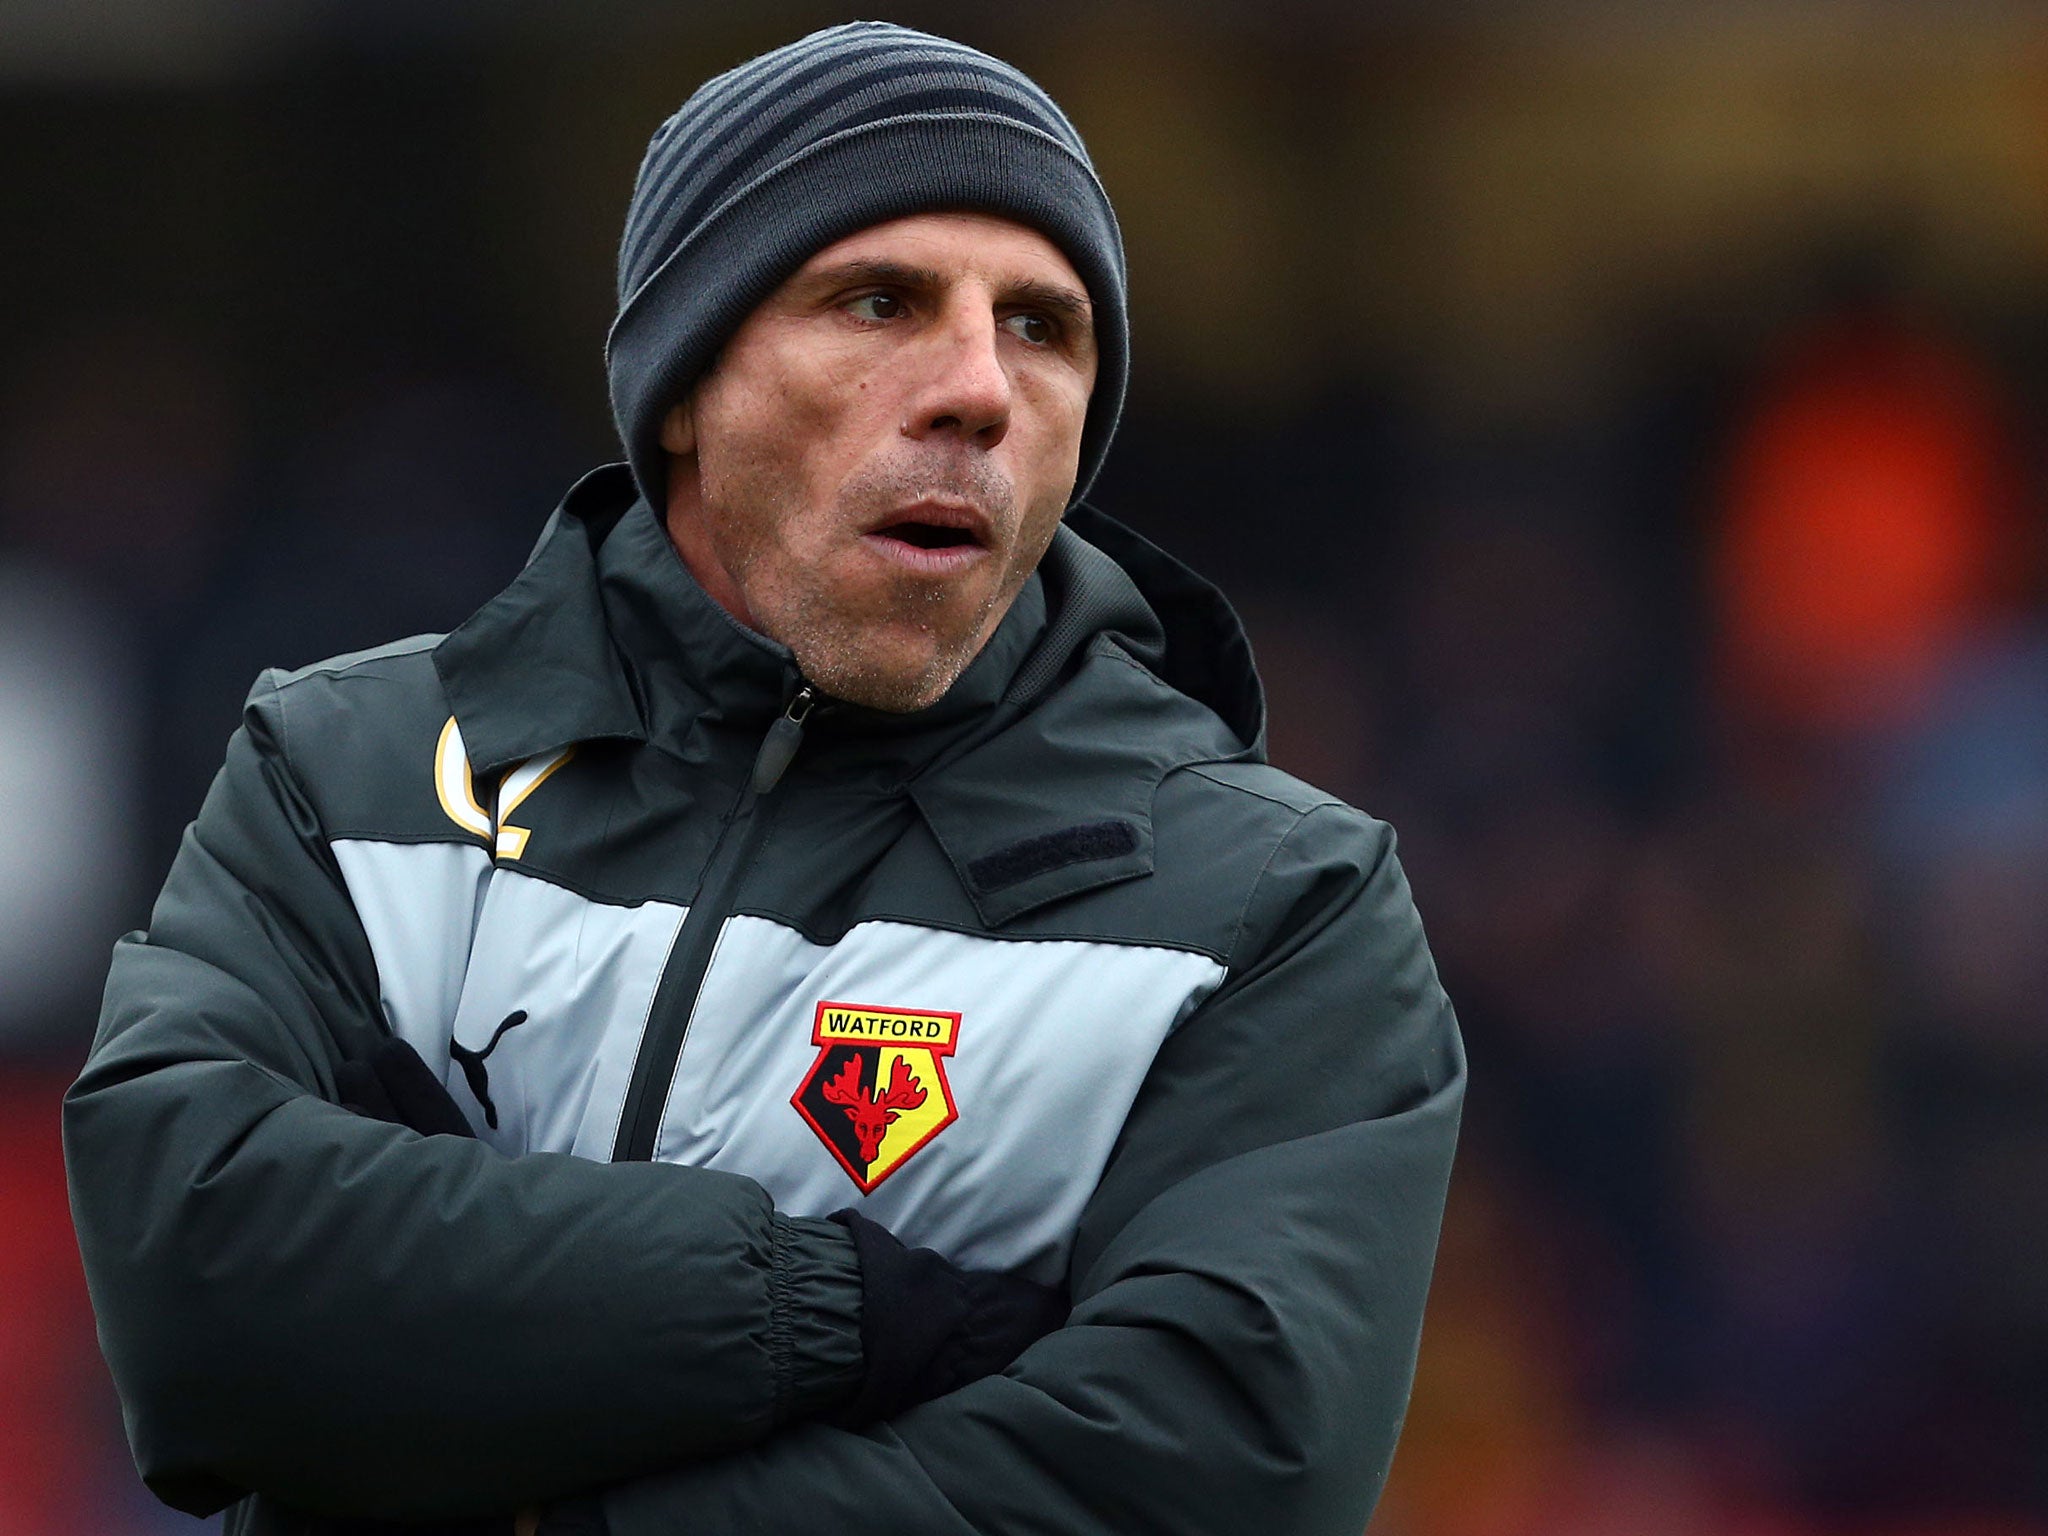 Gianfranco Zola's Watford remain second in the Championship